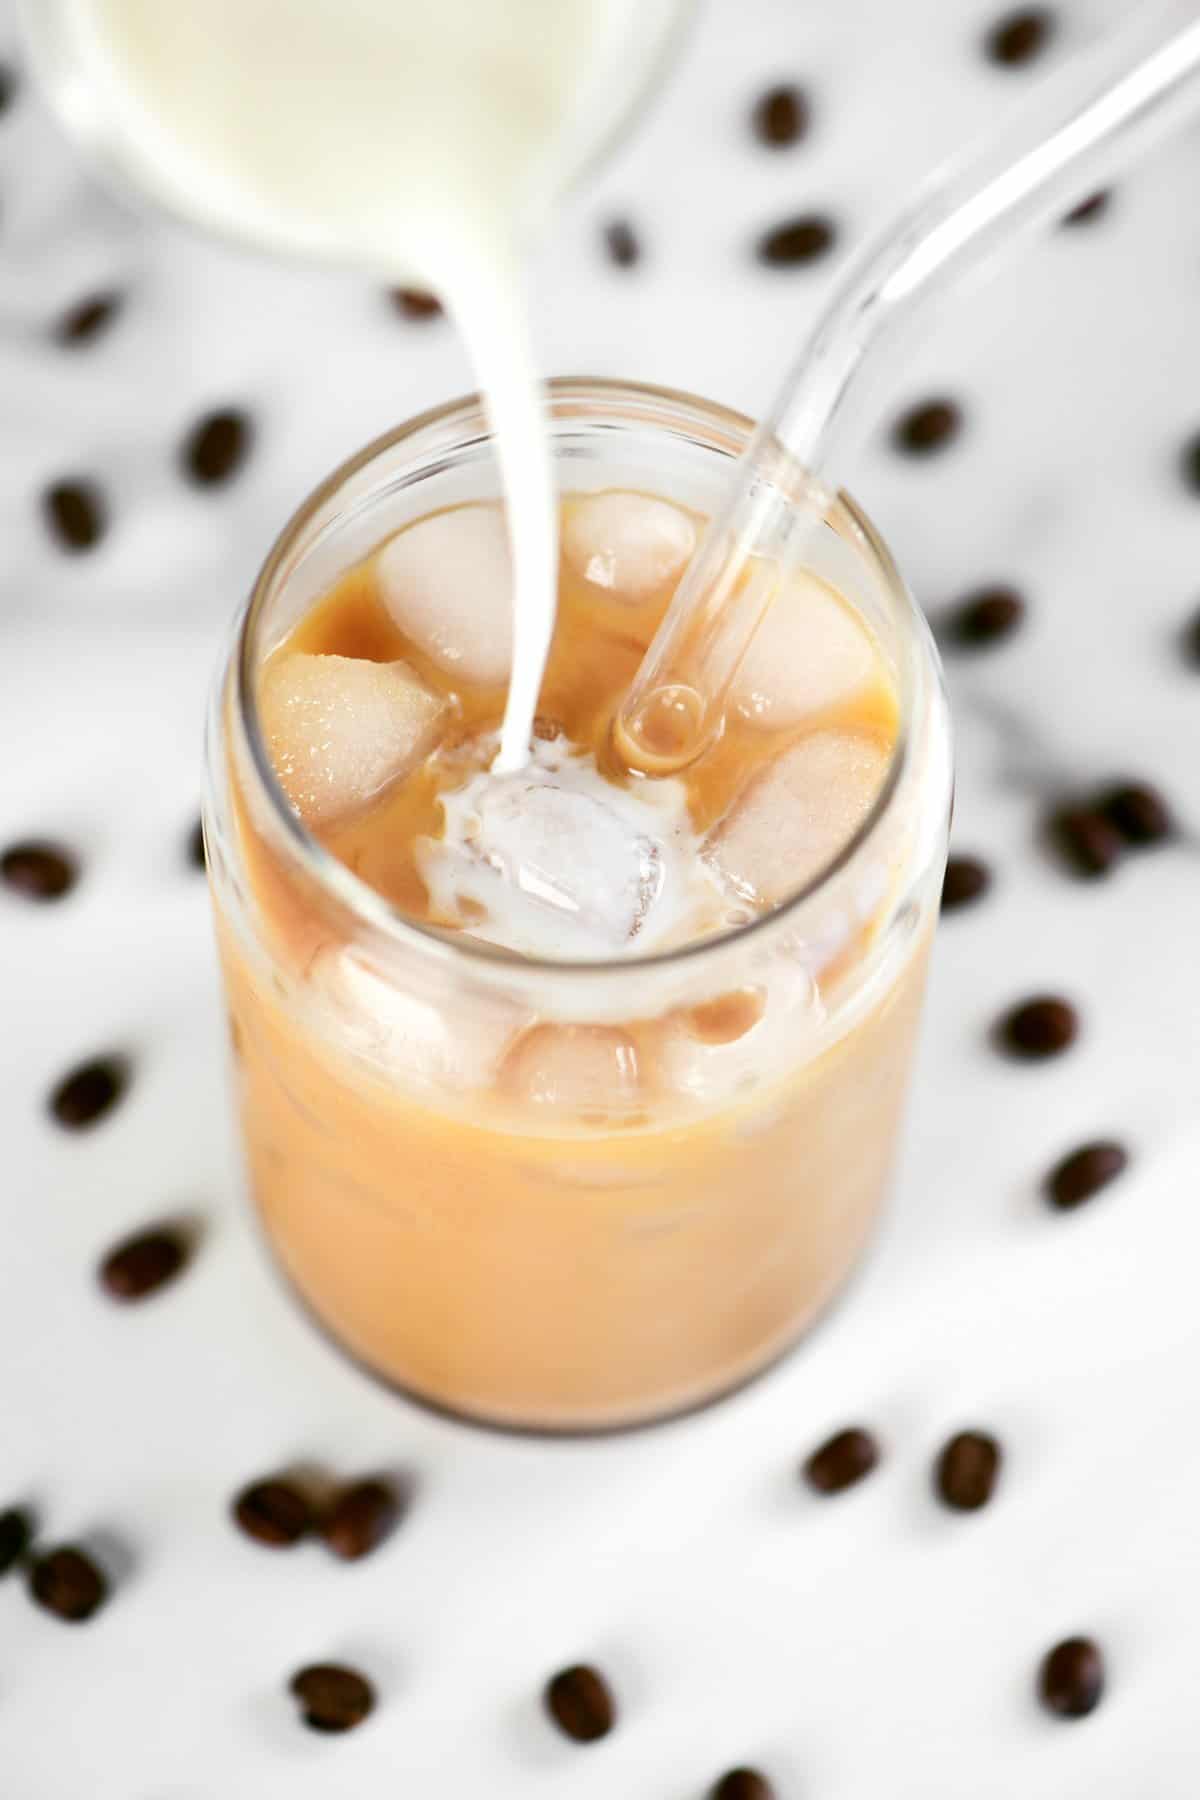 pouring half and half into iced coffee